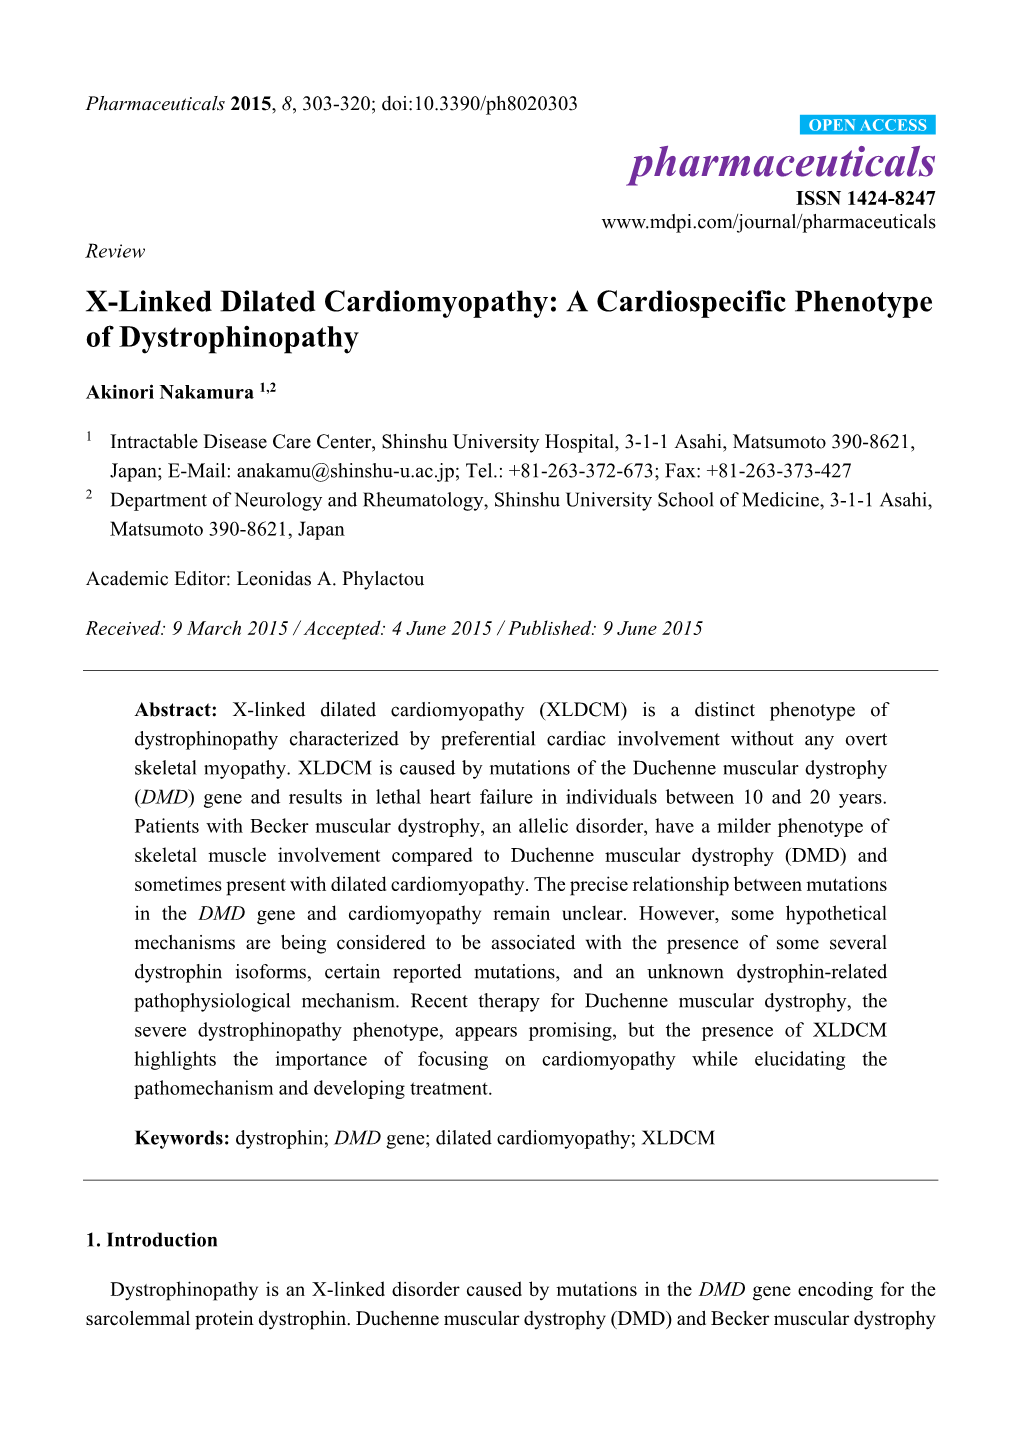 X-Linked Dilated Cardiomyopathy: a Cardiospecific Phenotype of Dystrophinopathy